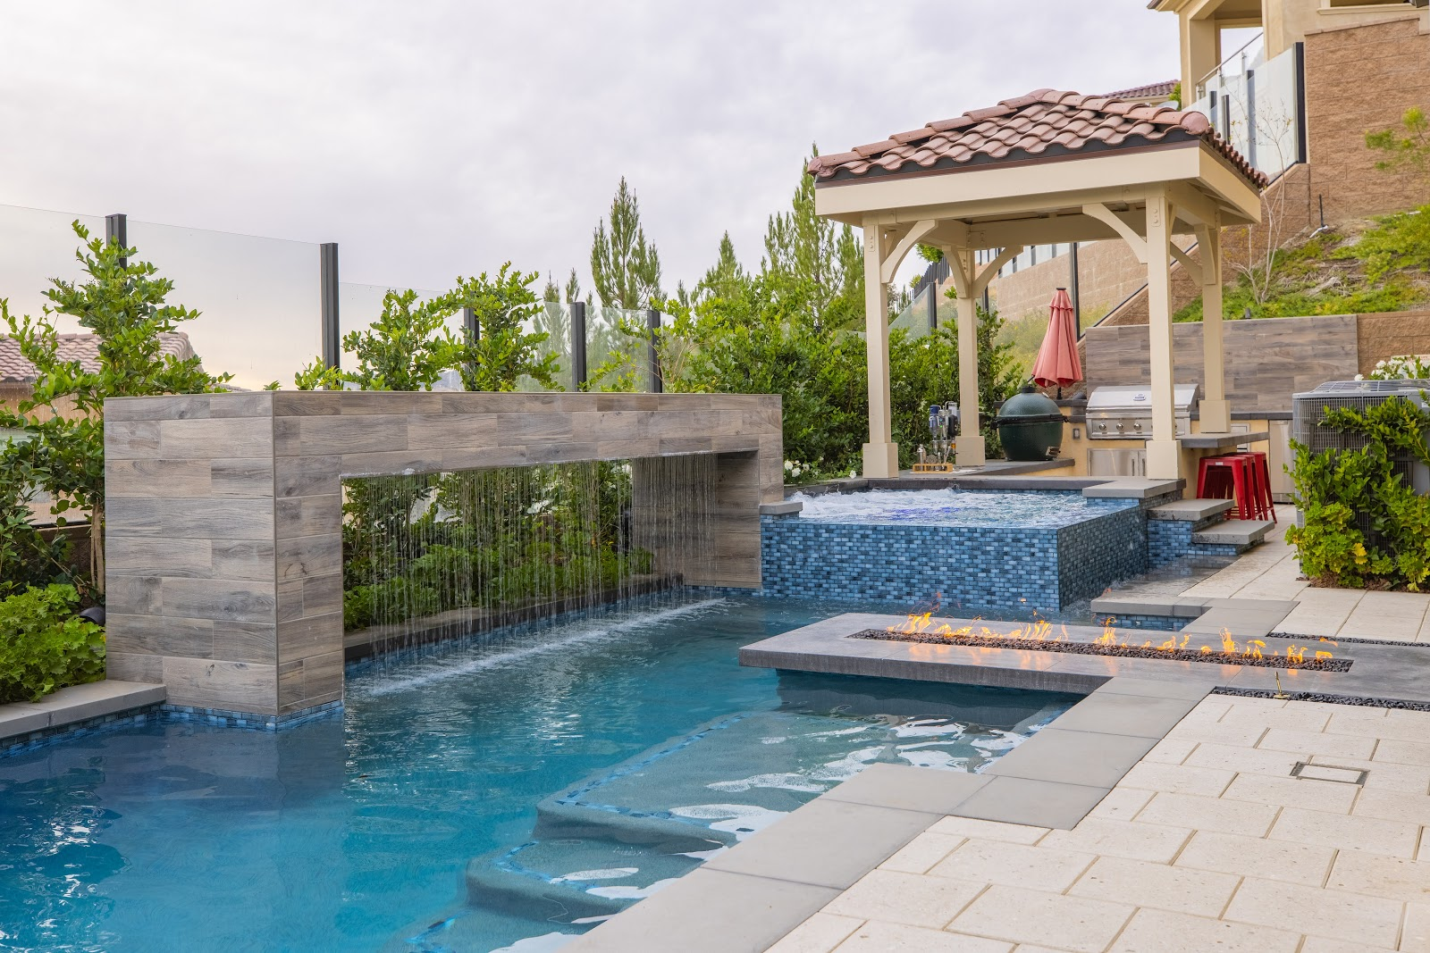 Great Design Tips When Remodeling Your Pool